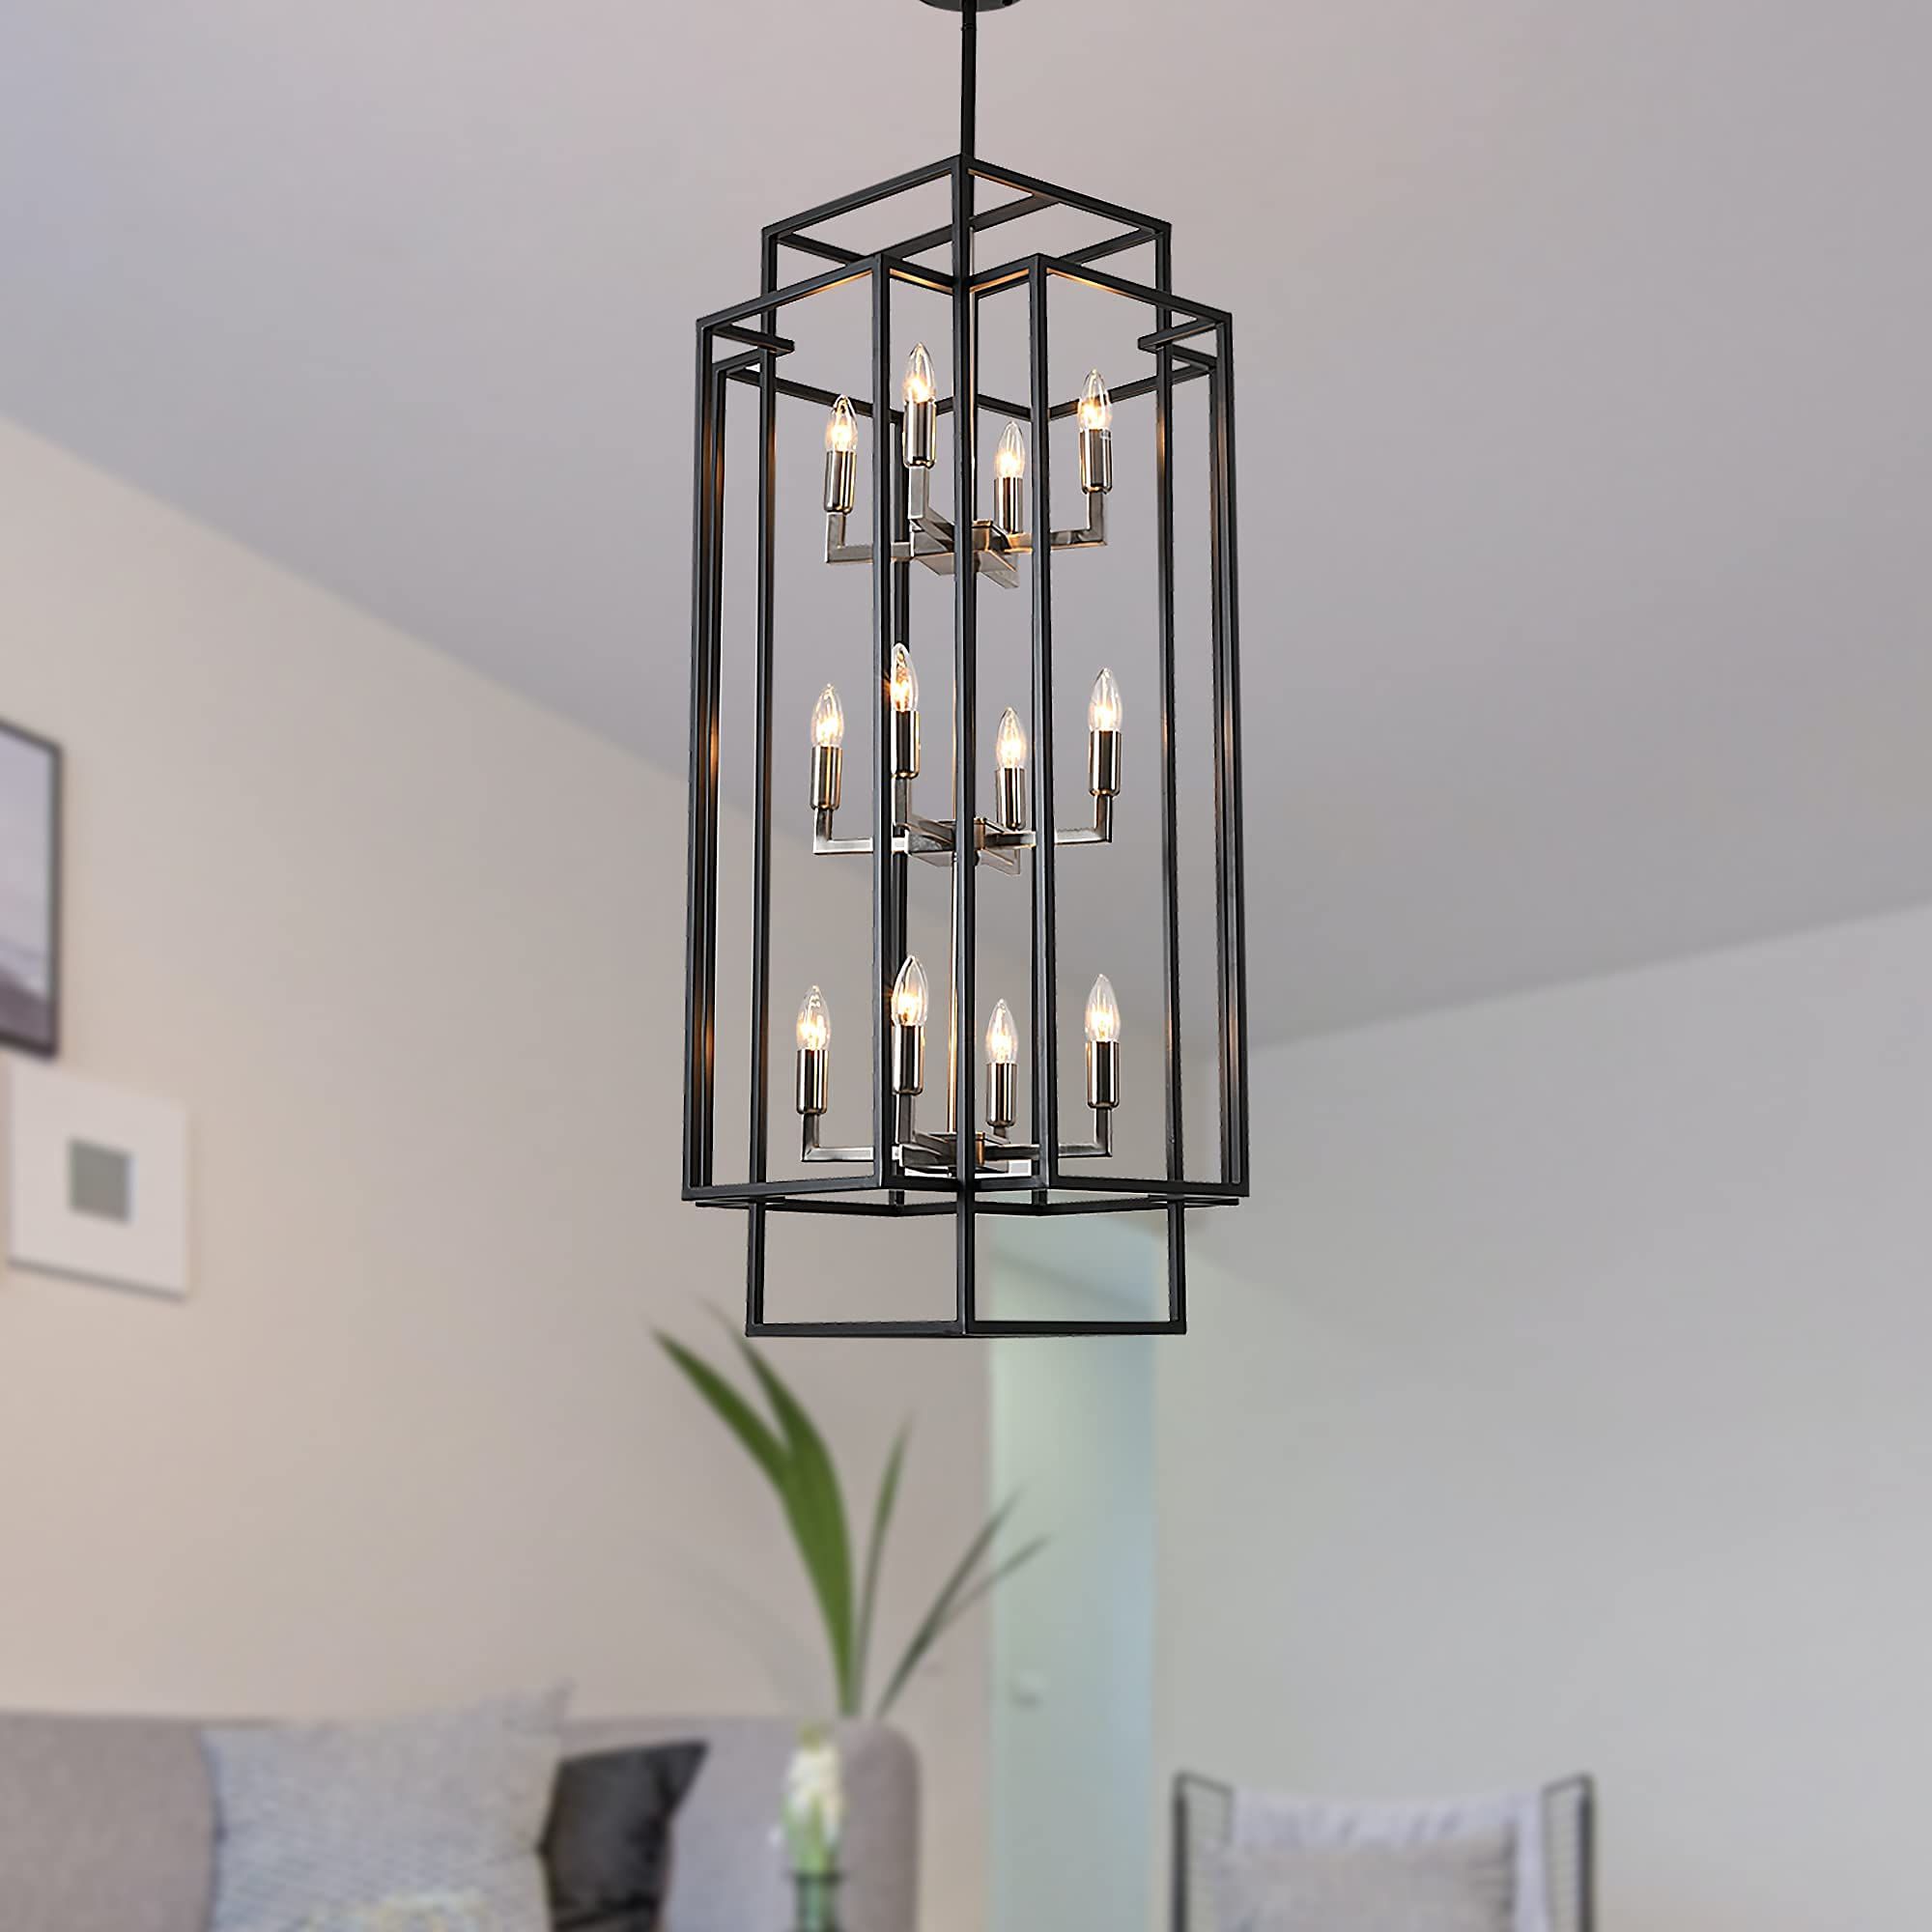 J&e Home 12 Light Lantern Tiered Pendant Light Fixtures,island Light,hall  Foyer Hanging Chandelier,wrought Iron Finish For Kitchen Island Farmhouse  Entryway Brushed Nickel, Black Grey – – Amazon Throughout 2019 12 Light Lantern Chandeliers (View 3 of 10)